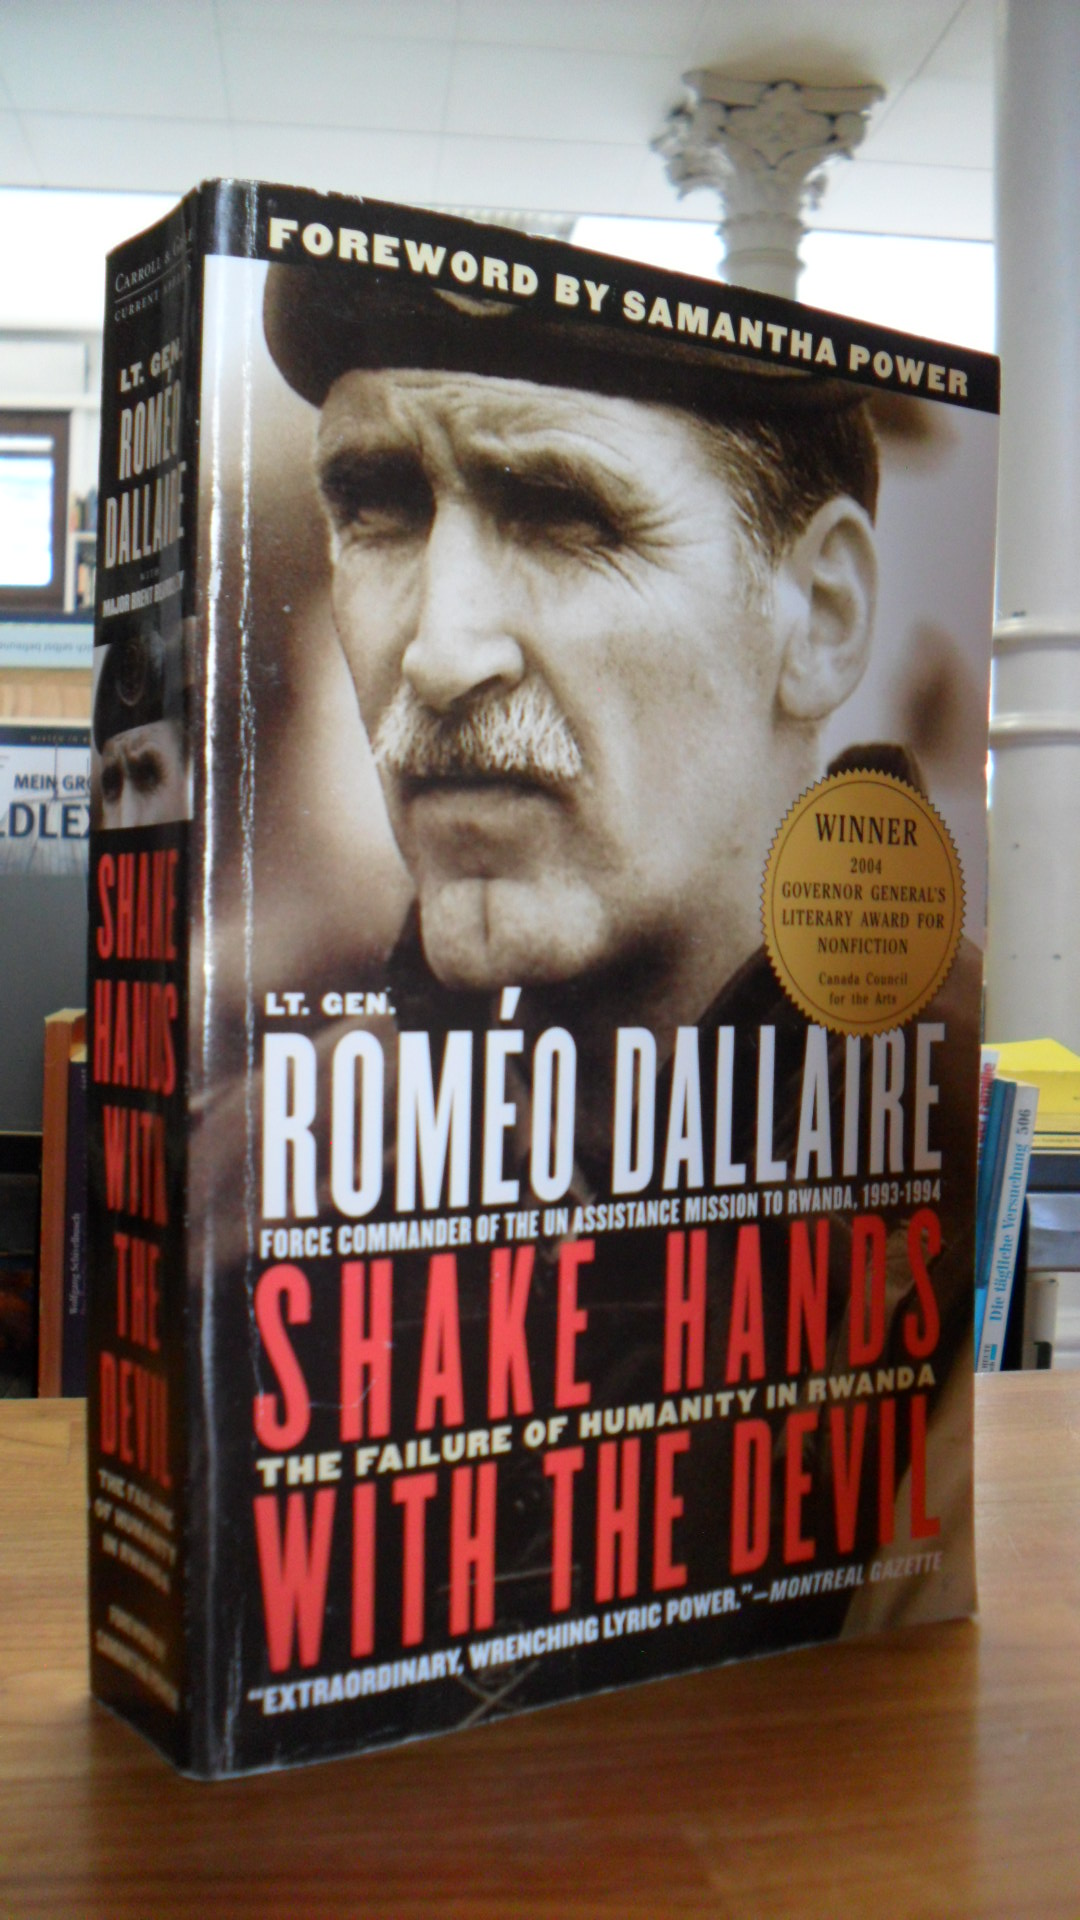 Dallaire, Shake Hands with the Devil – The Failure of Humanity in Rwanda – Forew